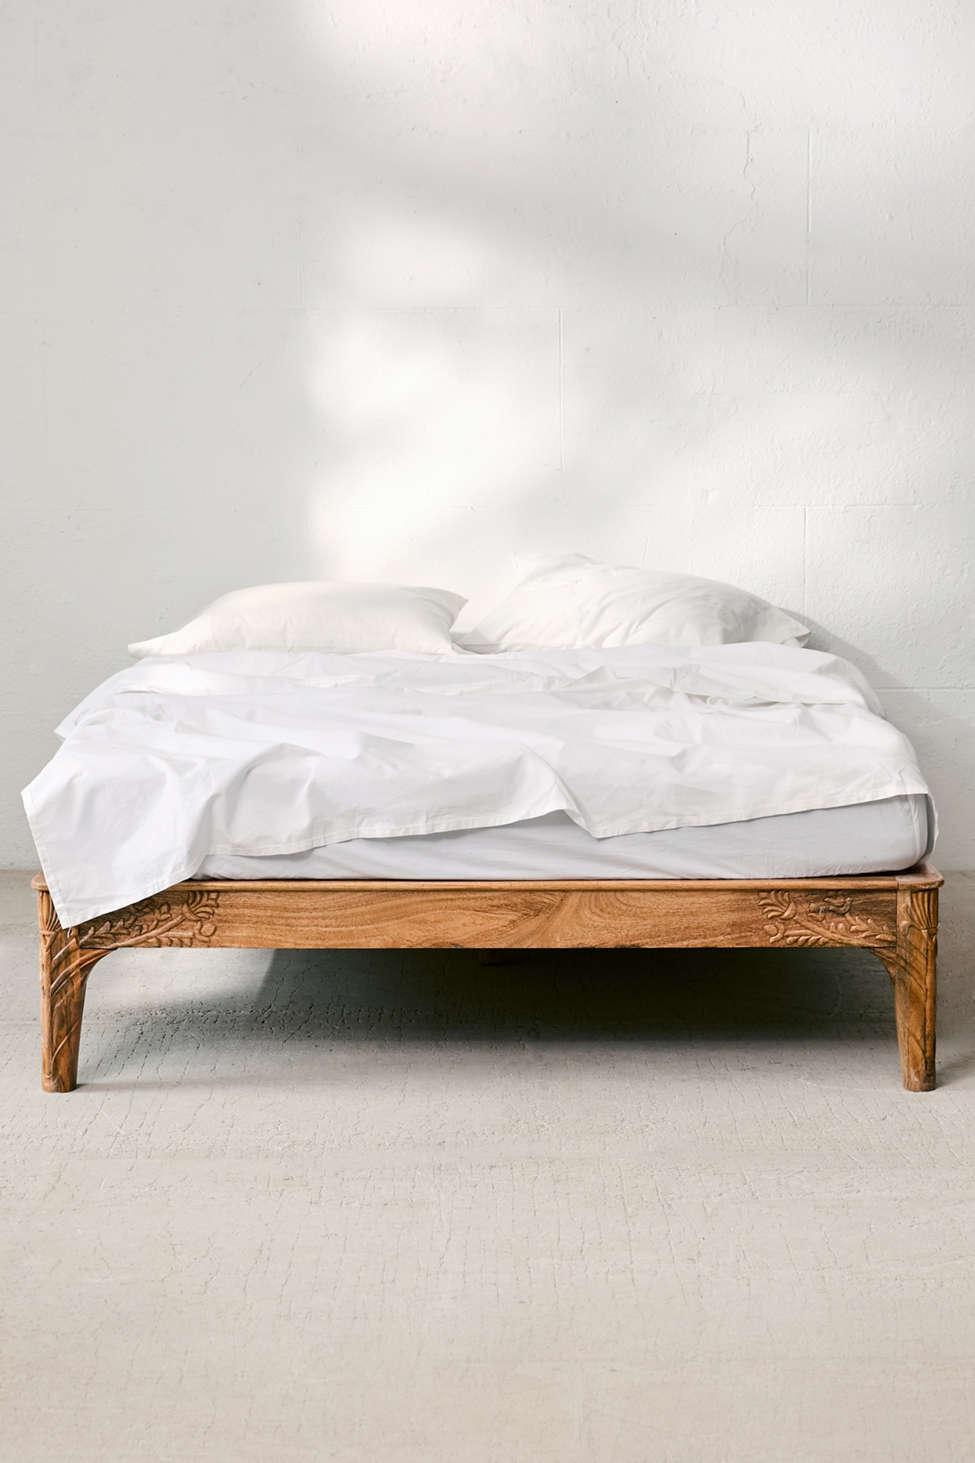 Urban Outfitters Andrea Carved Platform, Urban Outfitters Platform Bed Frame